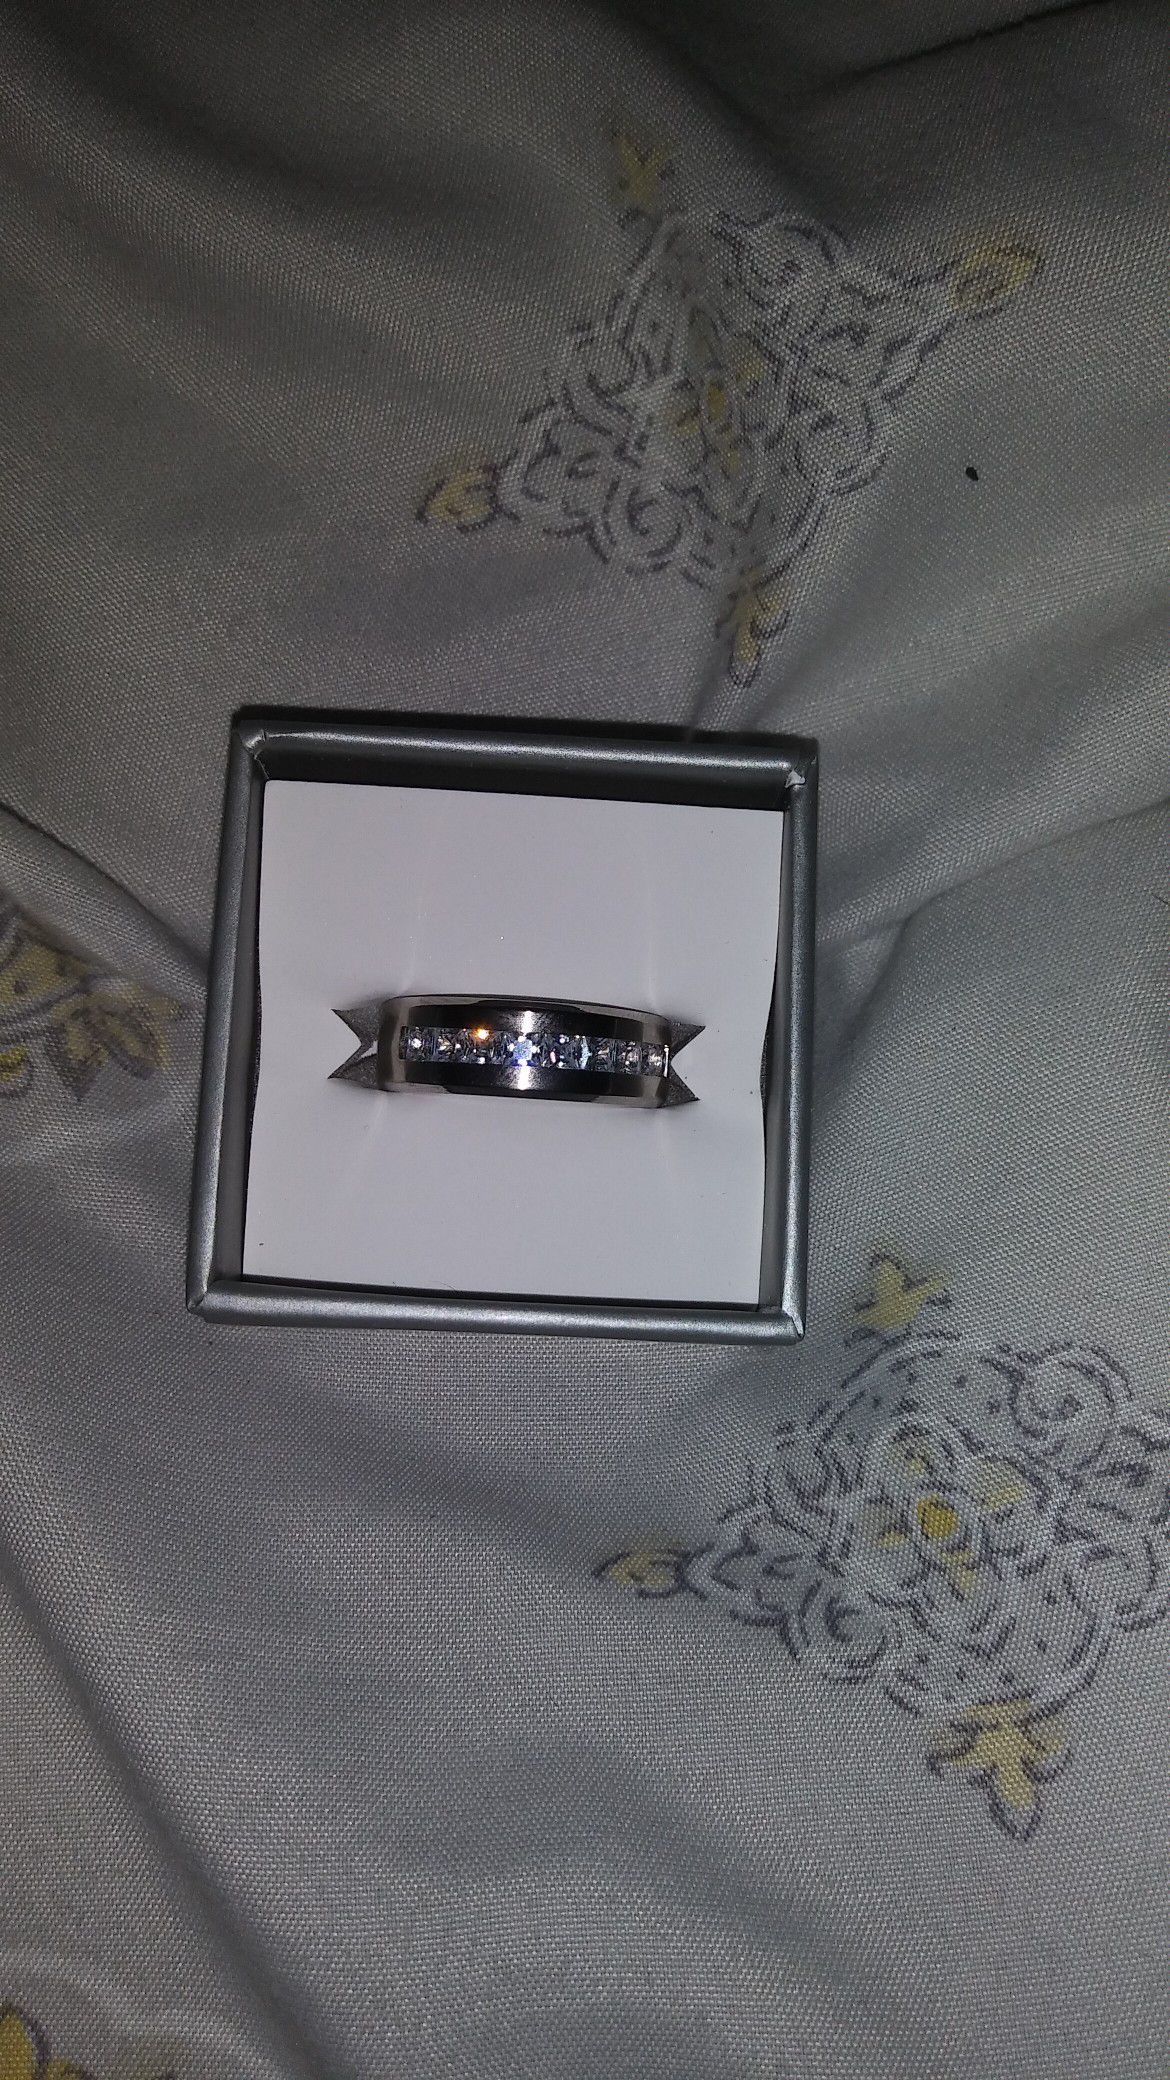 Selling a gorgeous man ring